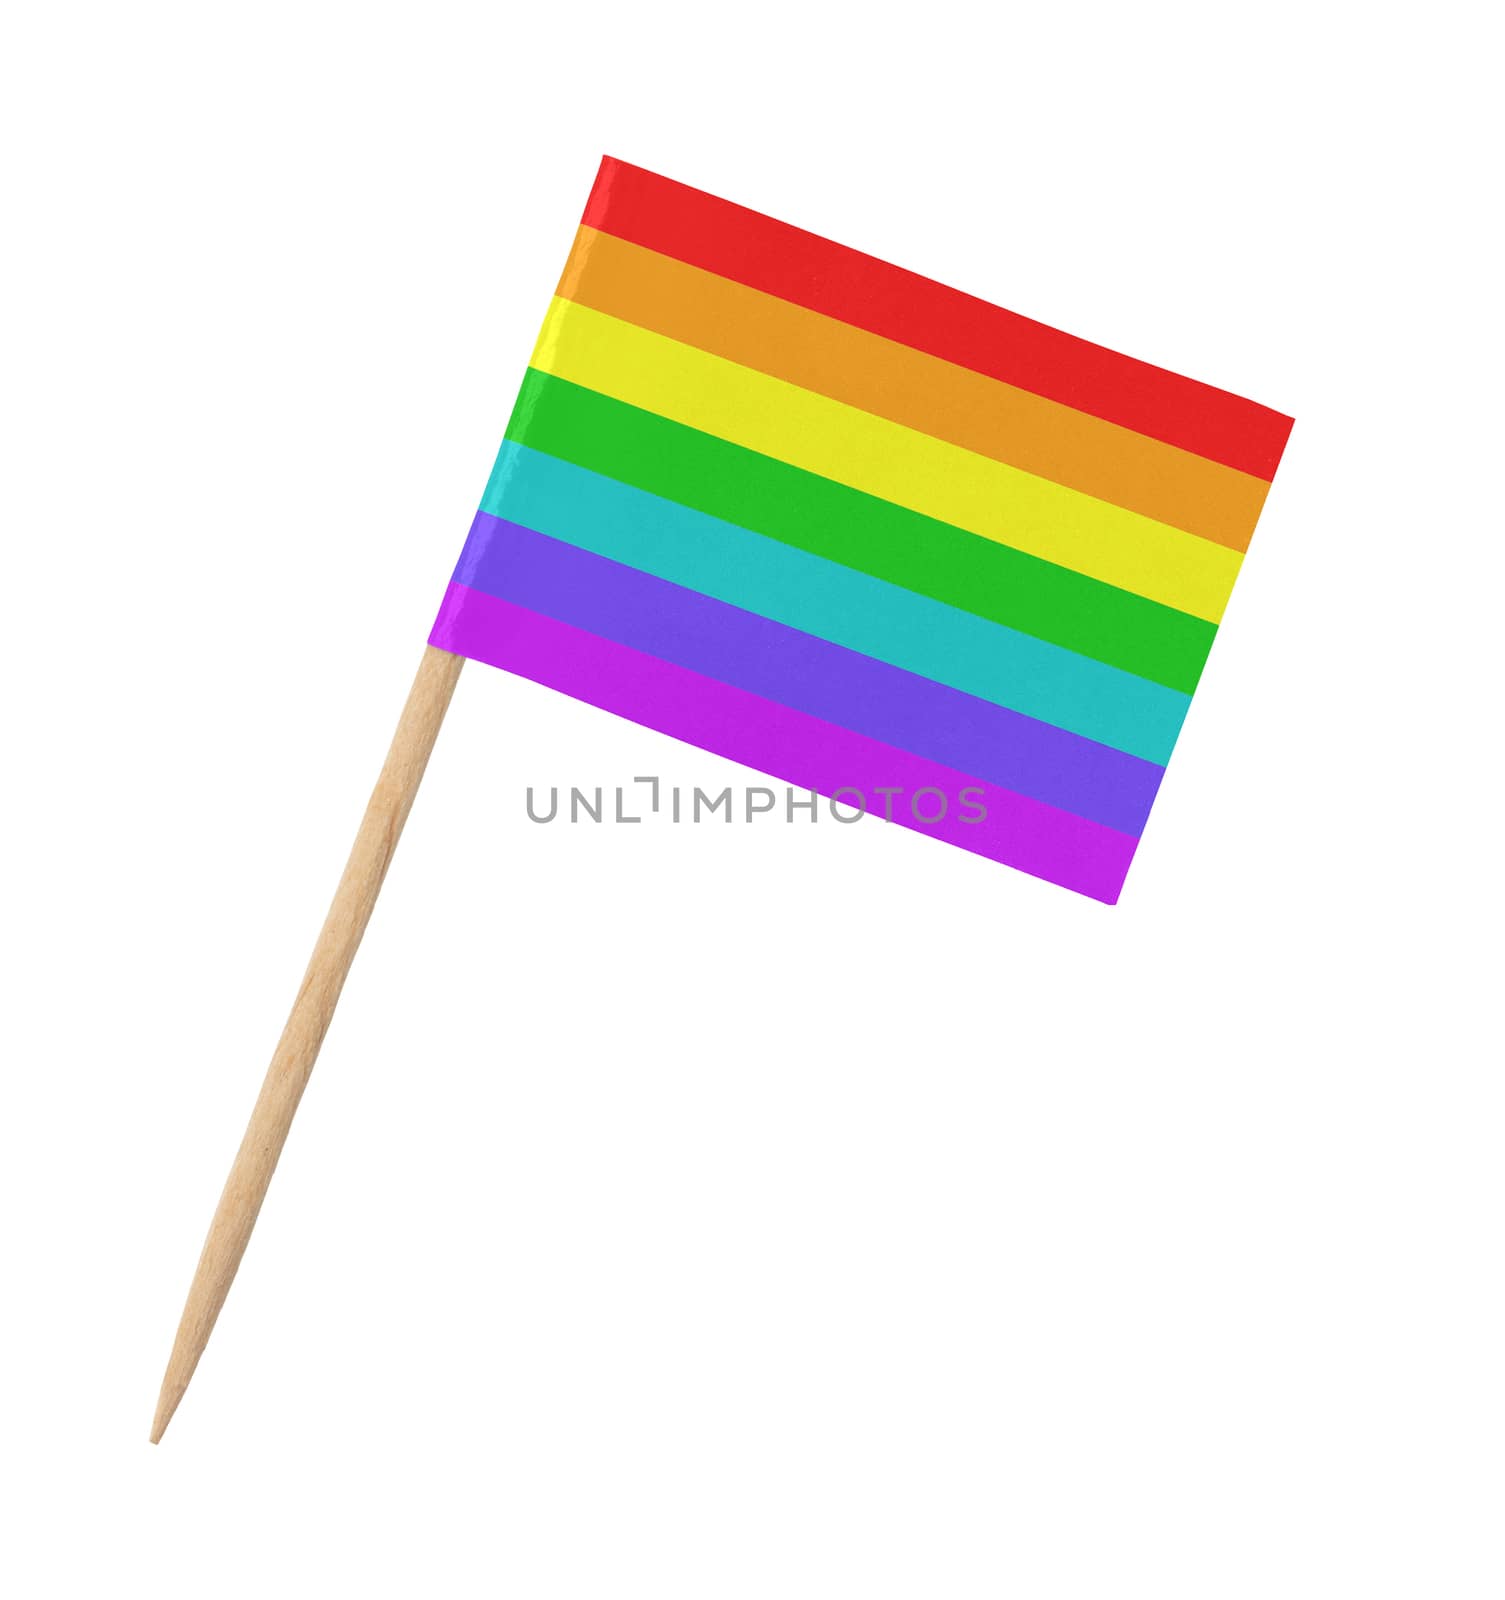 Small paper rainbow flag on wooden stick, isolated on white